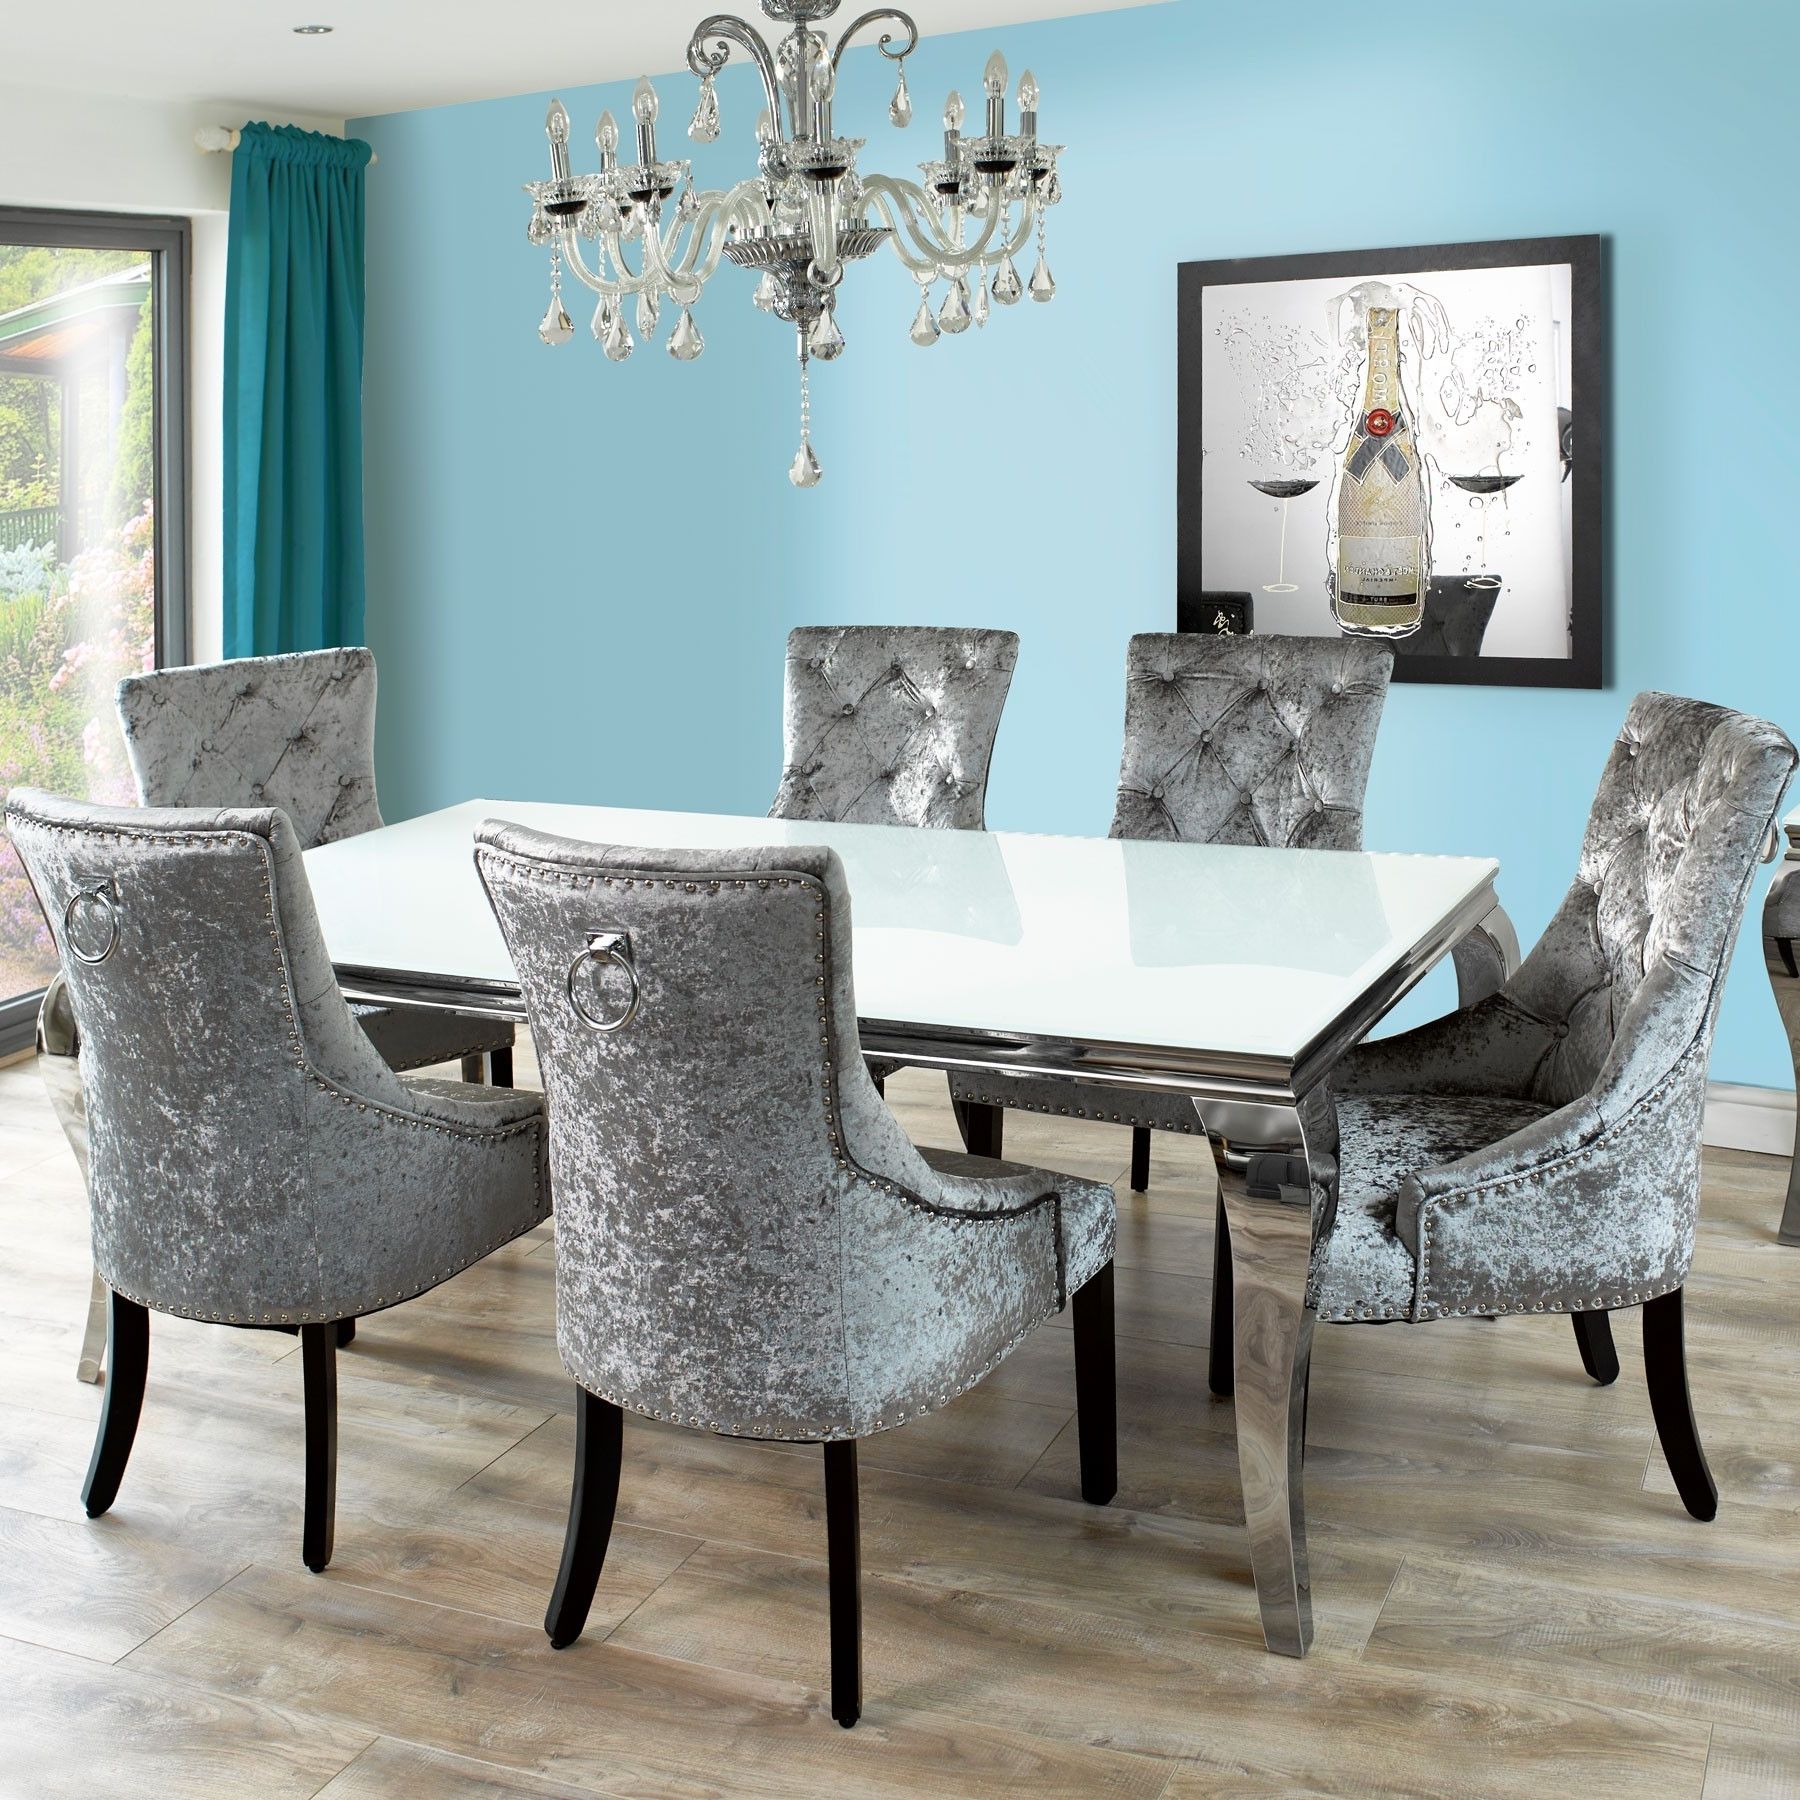 Fadenza White Glass Dining Table And 6 Silver Chairs With Rush Seat With Widely Used Blue Glass Dining Tables (View 14 of 25)